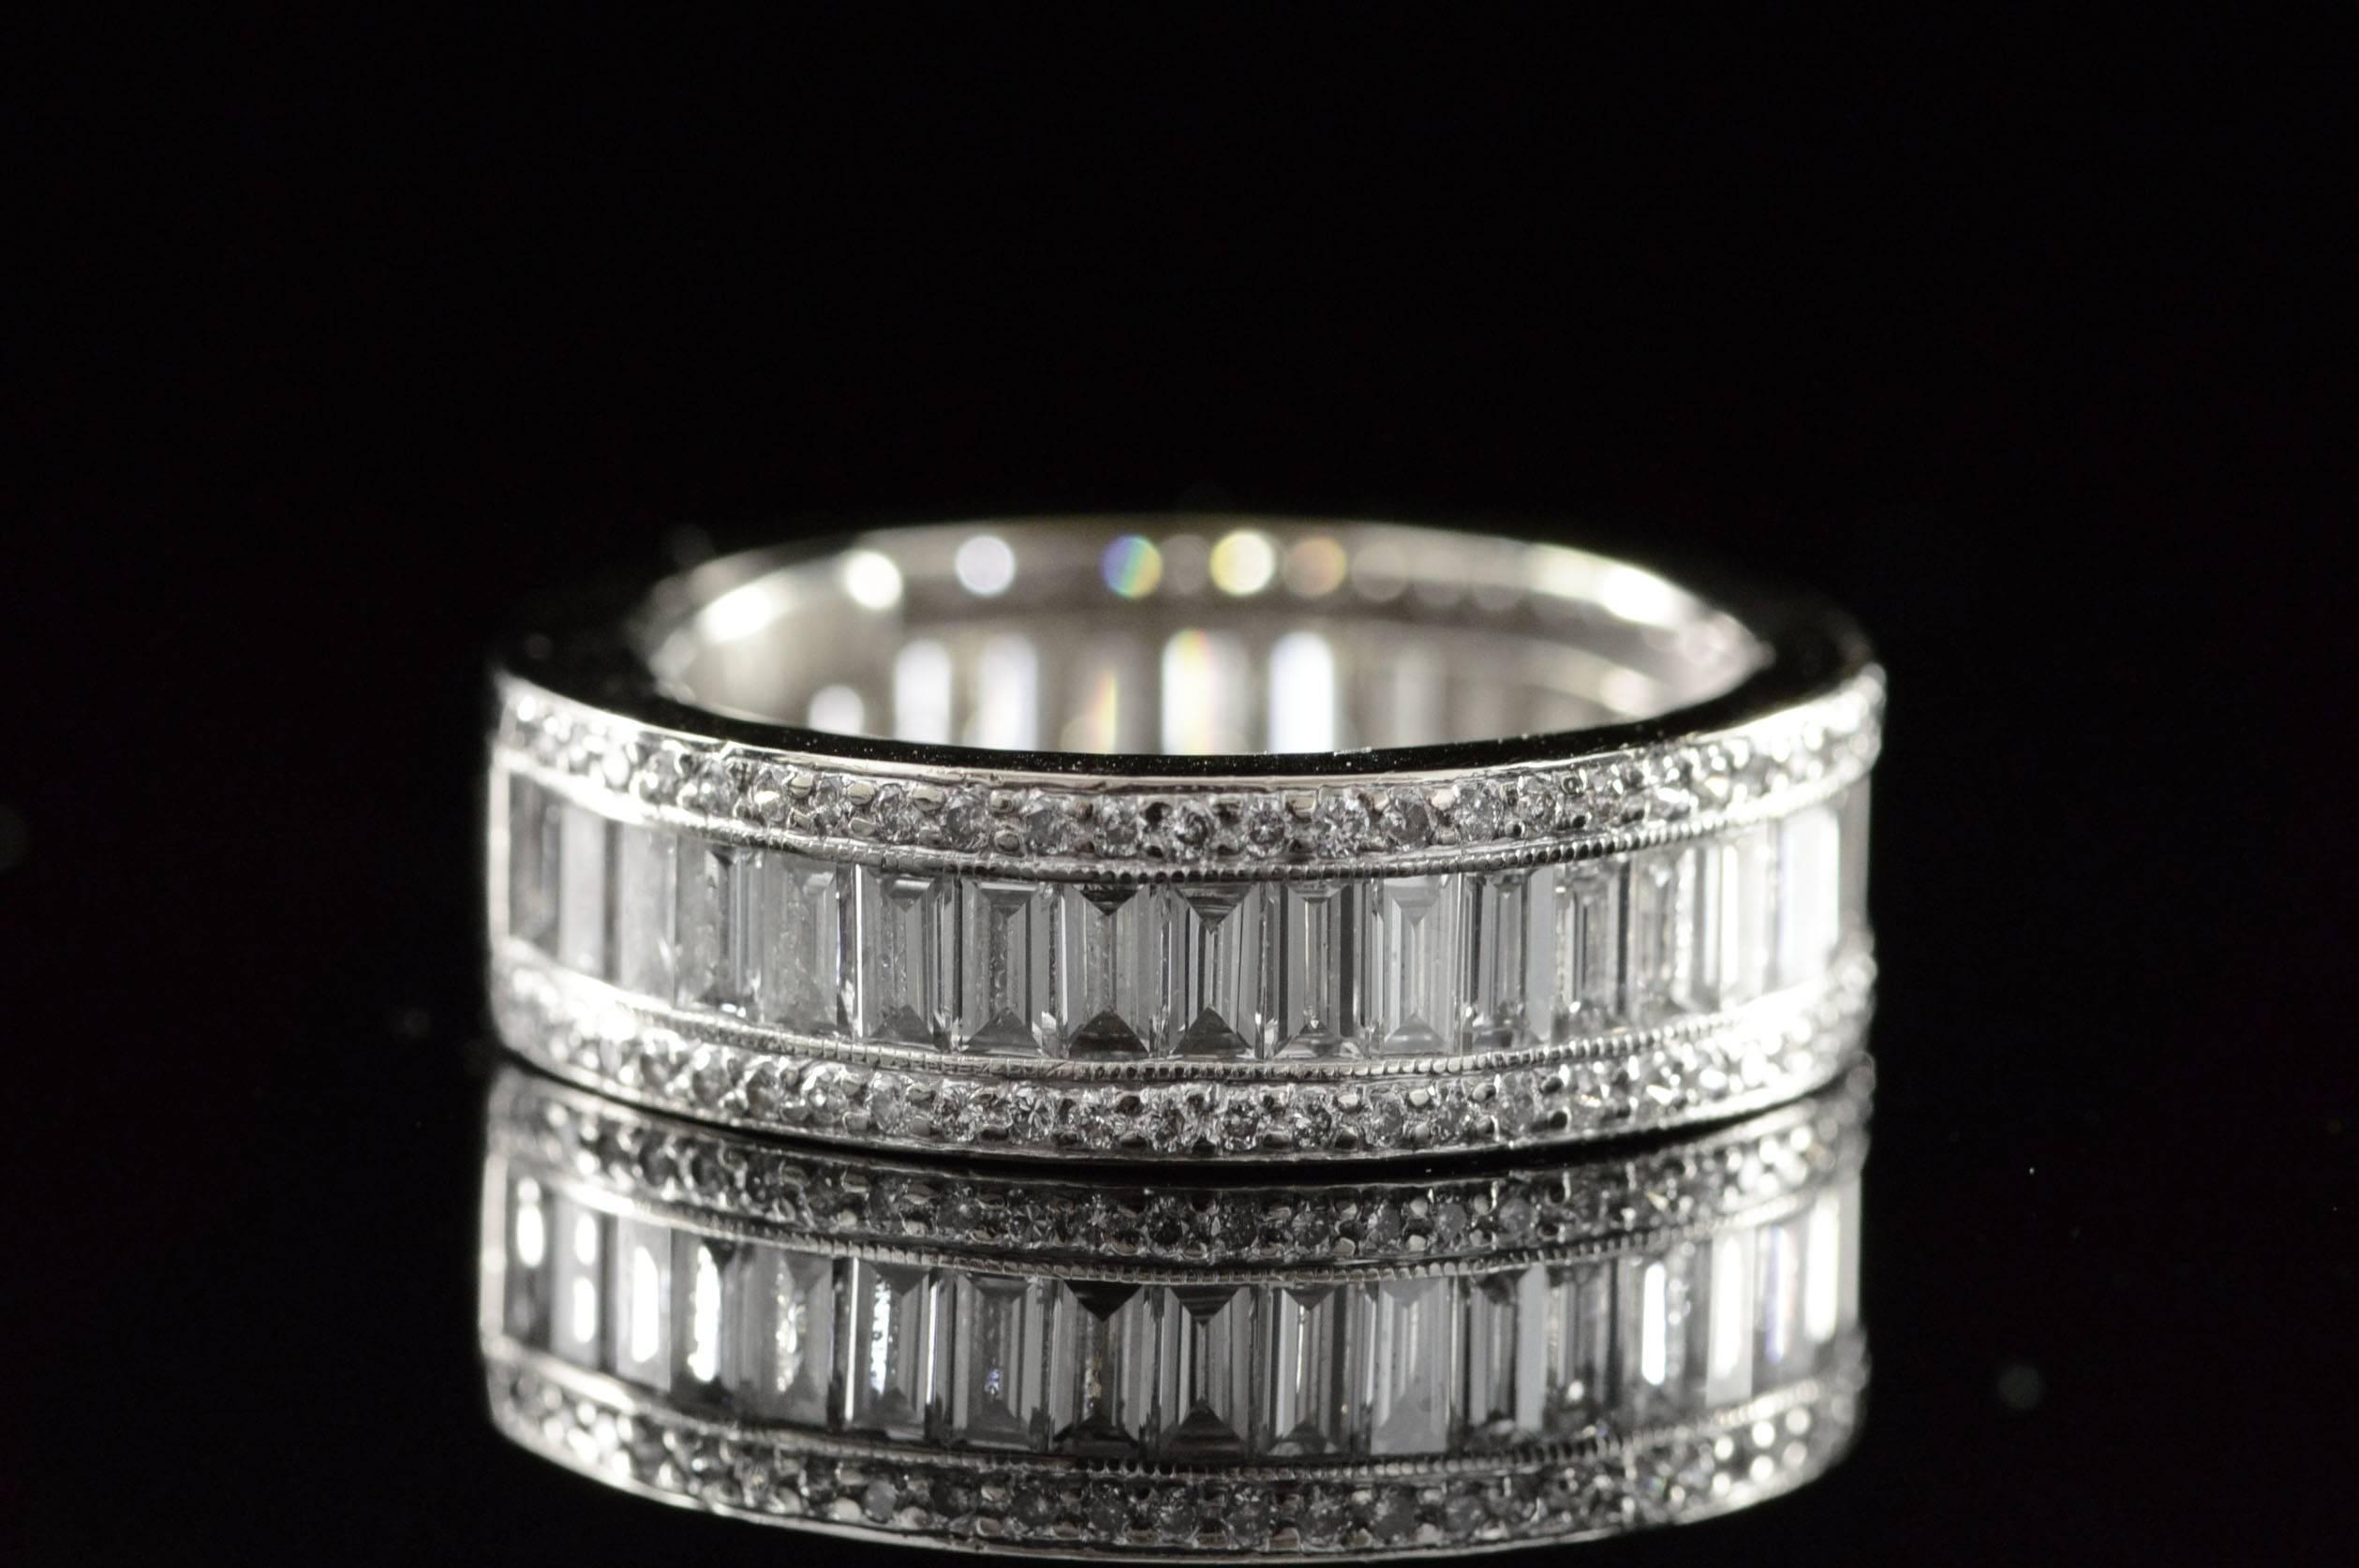 All diamonds are graded according to GIA grading standards.

·Item: 18K 3.12 Ctw Baguette & Round G-H/VS Wedding Band Ring Size 9 White Gold

·Era: Modern / 2000s

·Composition: 18k Gold Marked/Tested

·Gem Stone: 129x Diamonds=3.12Ctw